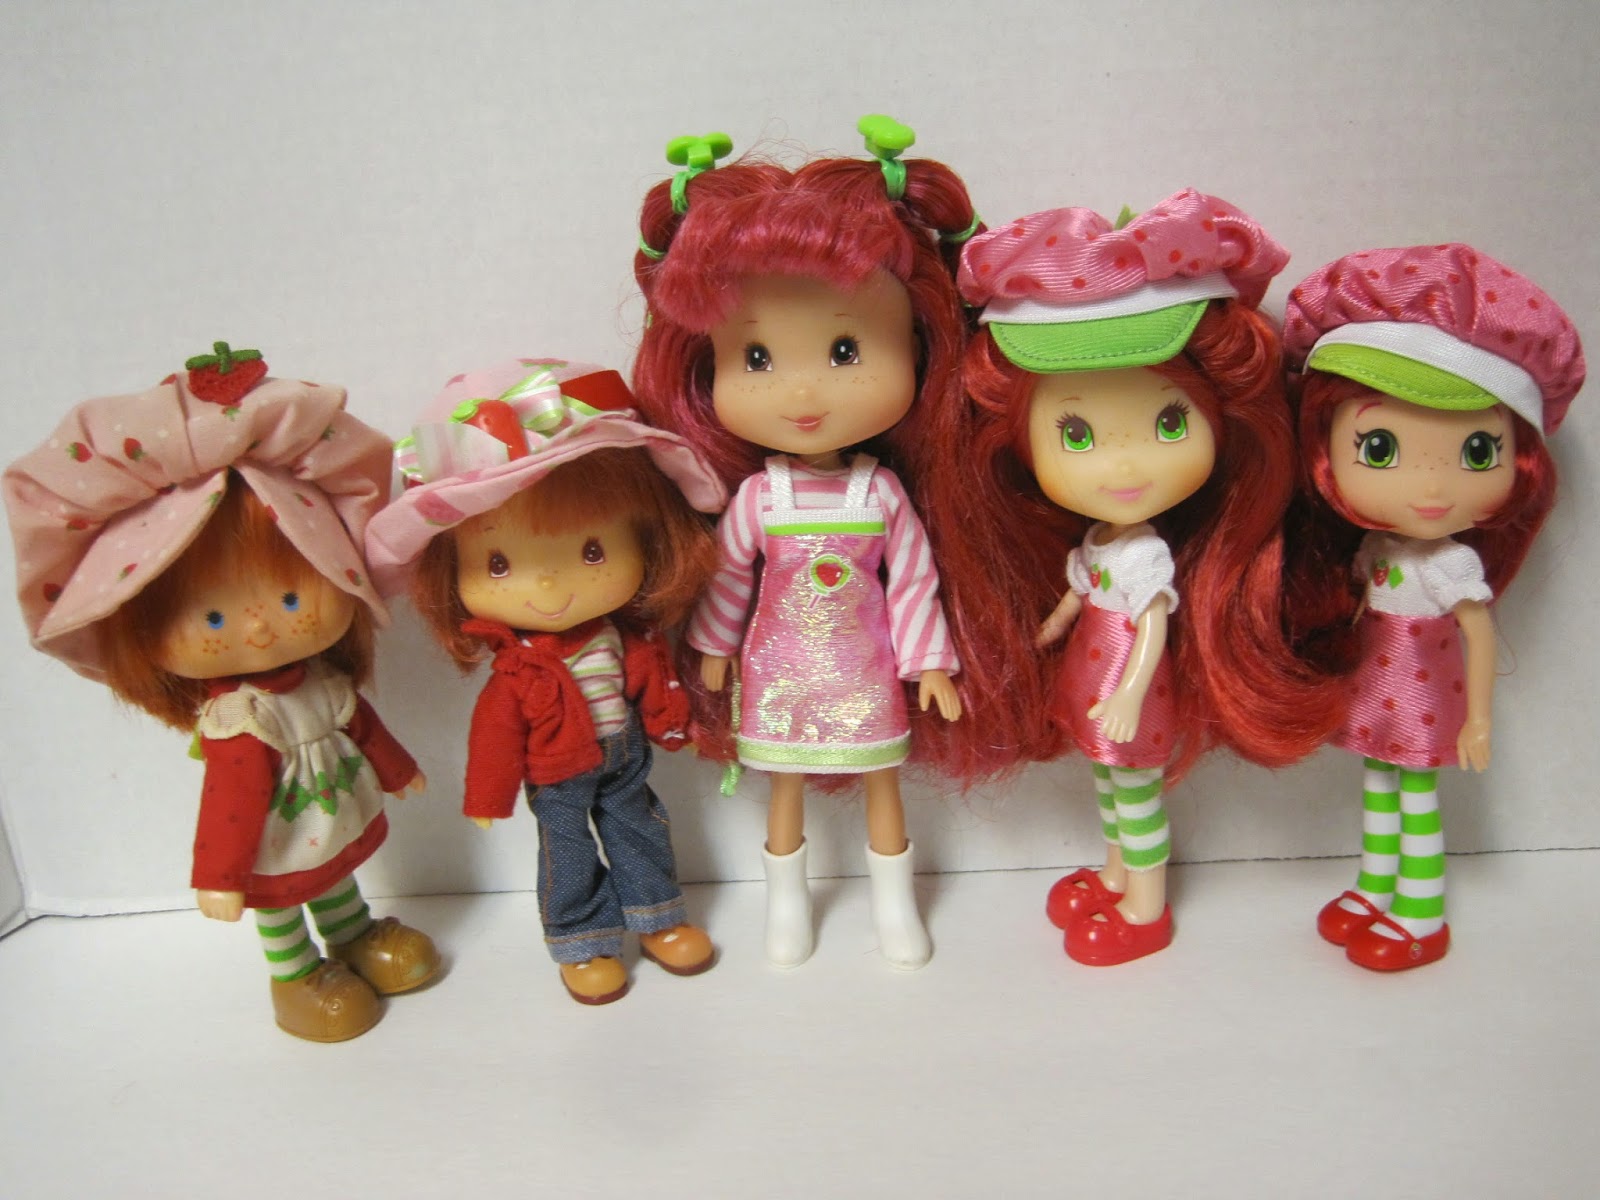 RARE 2003 STRAWBERRY SHORTCAKE SCENTED DOLL BERRY BEST FRIENDS CAT NEW SEALED !